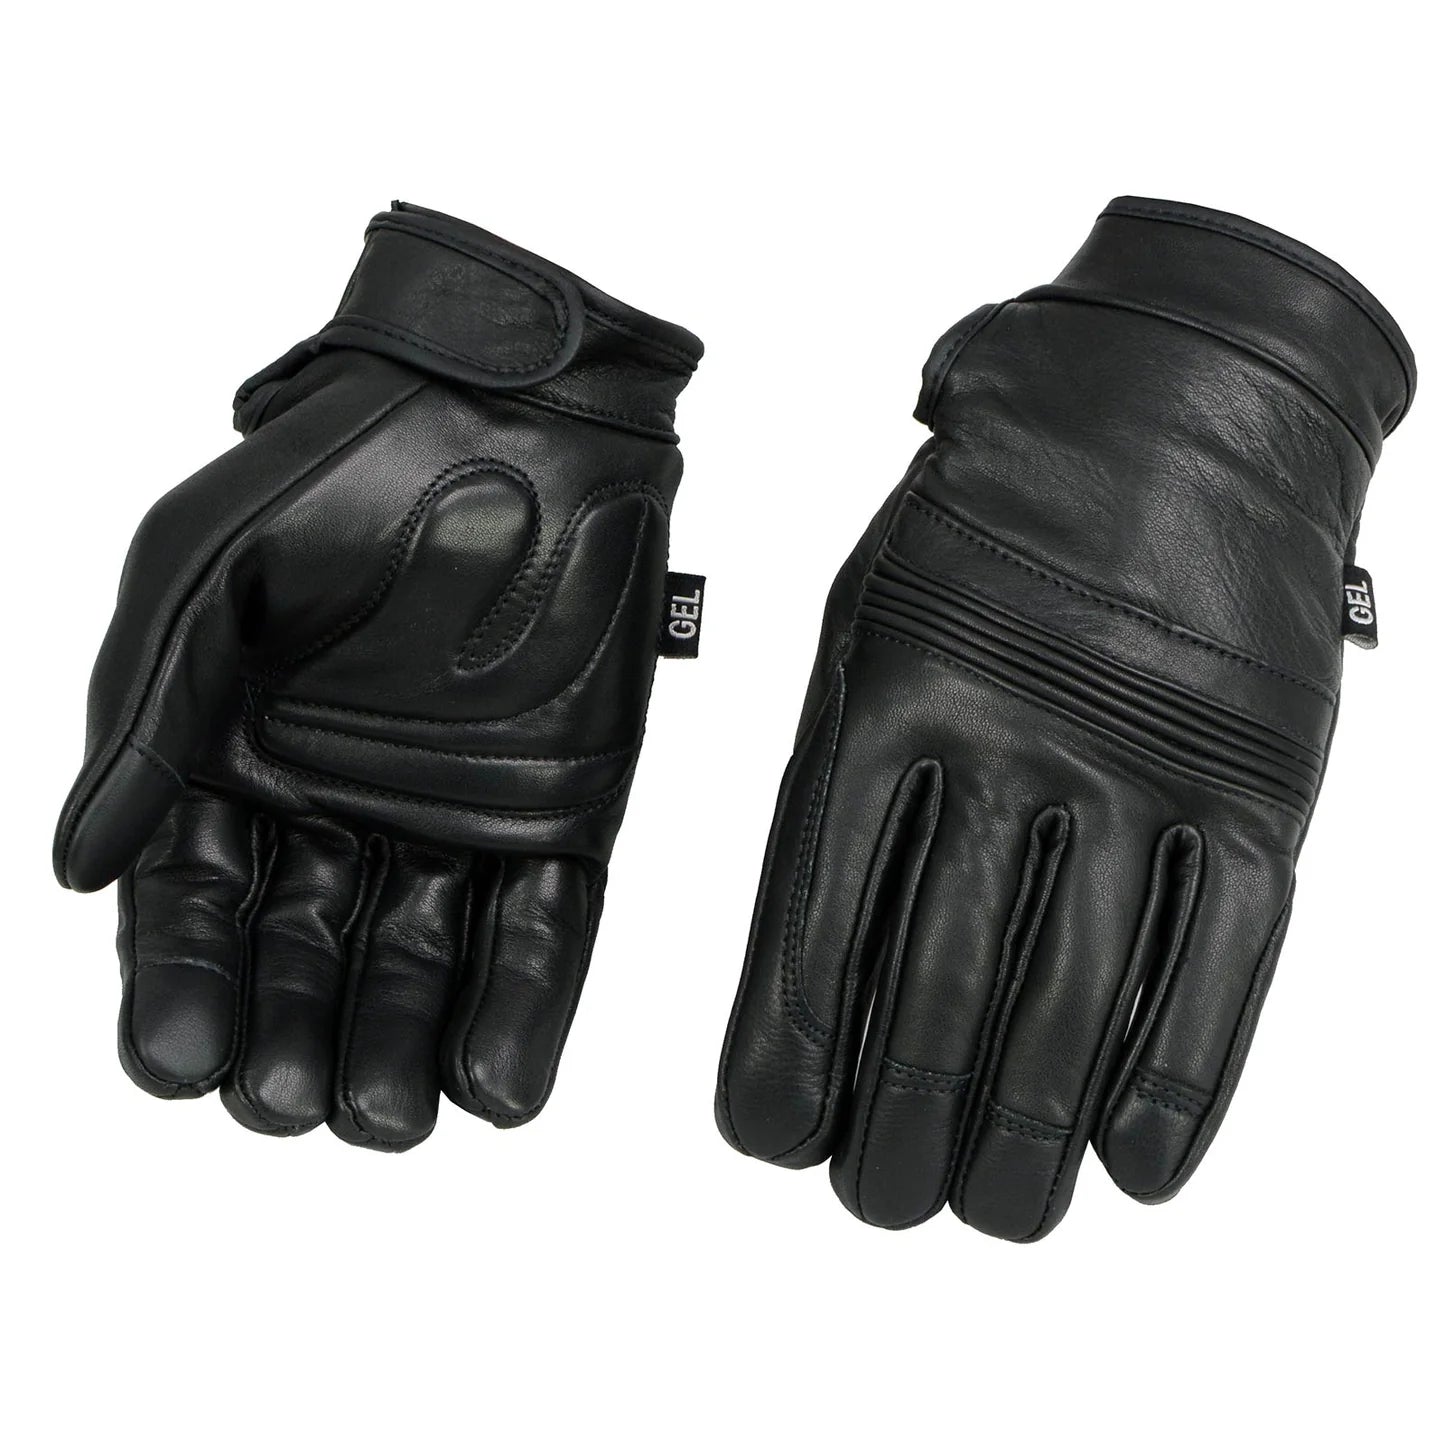 Men's Black Leather i-Touch Screen Compatible Gel Palm Motorcycle Hand Gloves w/ Flex Knuckles